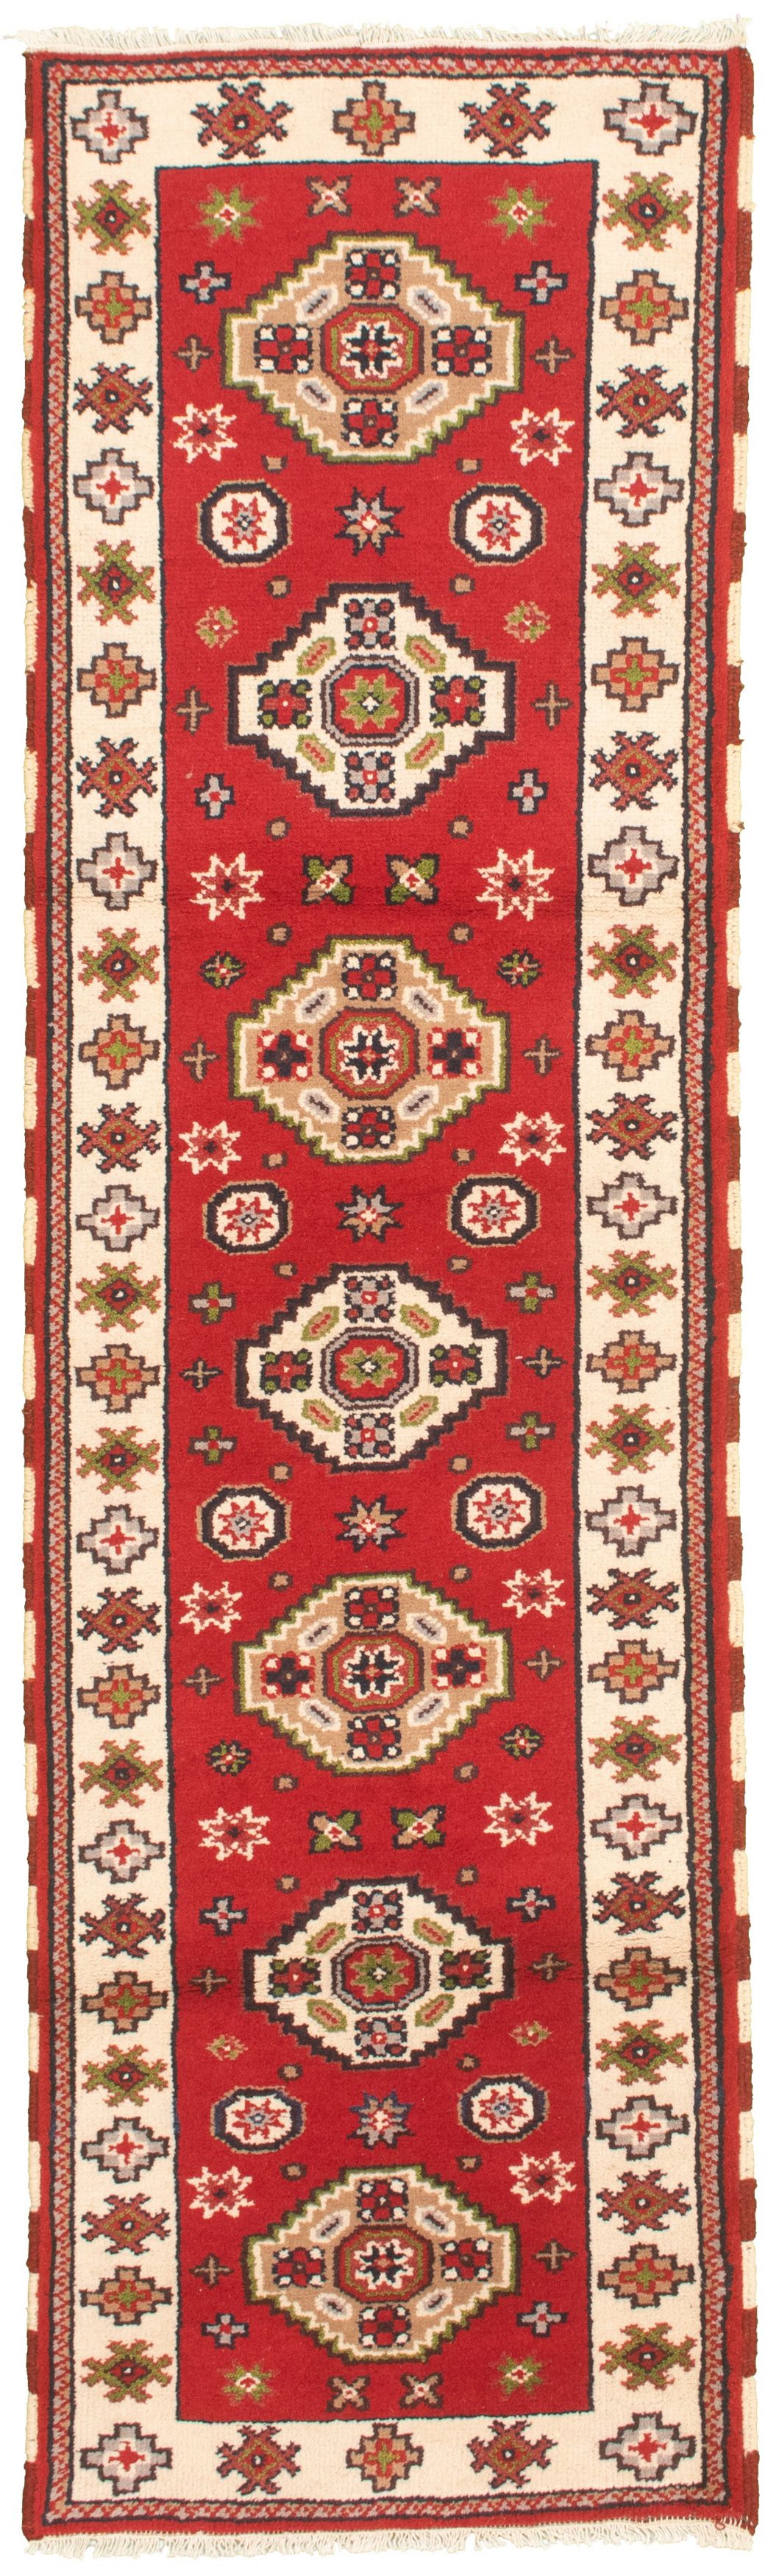 Hand-knotted Royal Kazak Red Wool Rug 2'8" x 9'7"  Size: 2'8" x 9'7"  